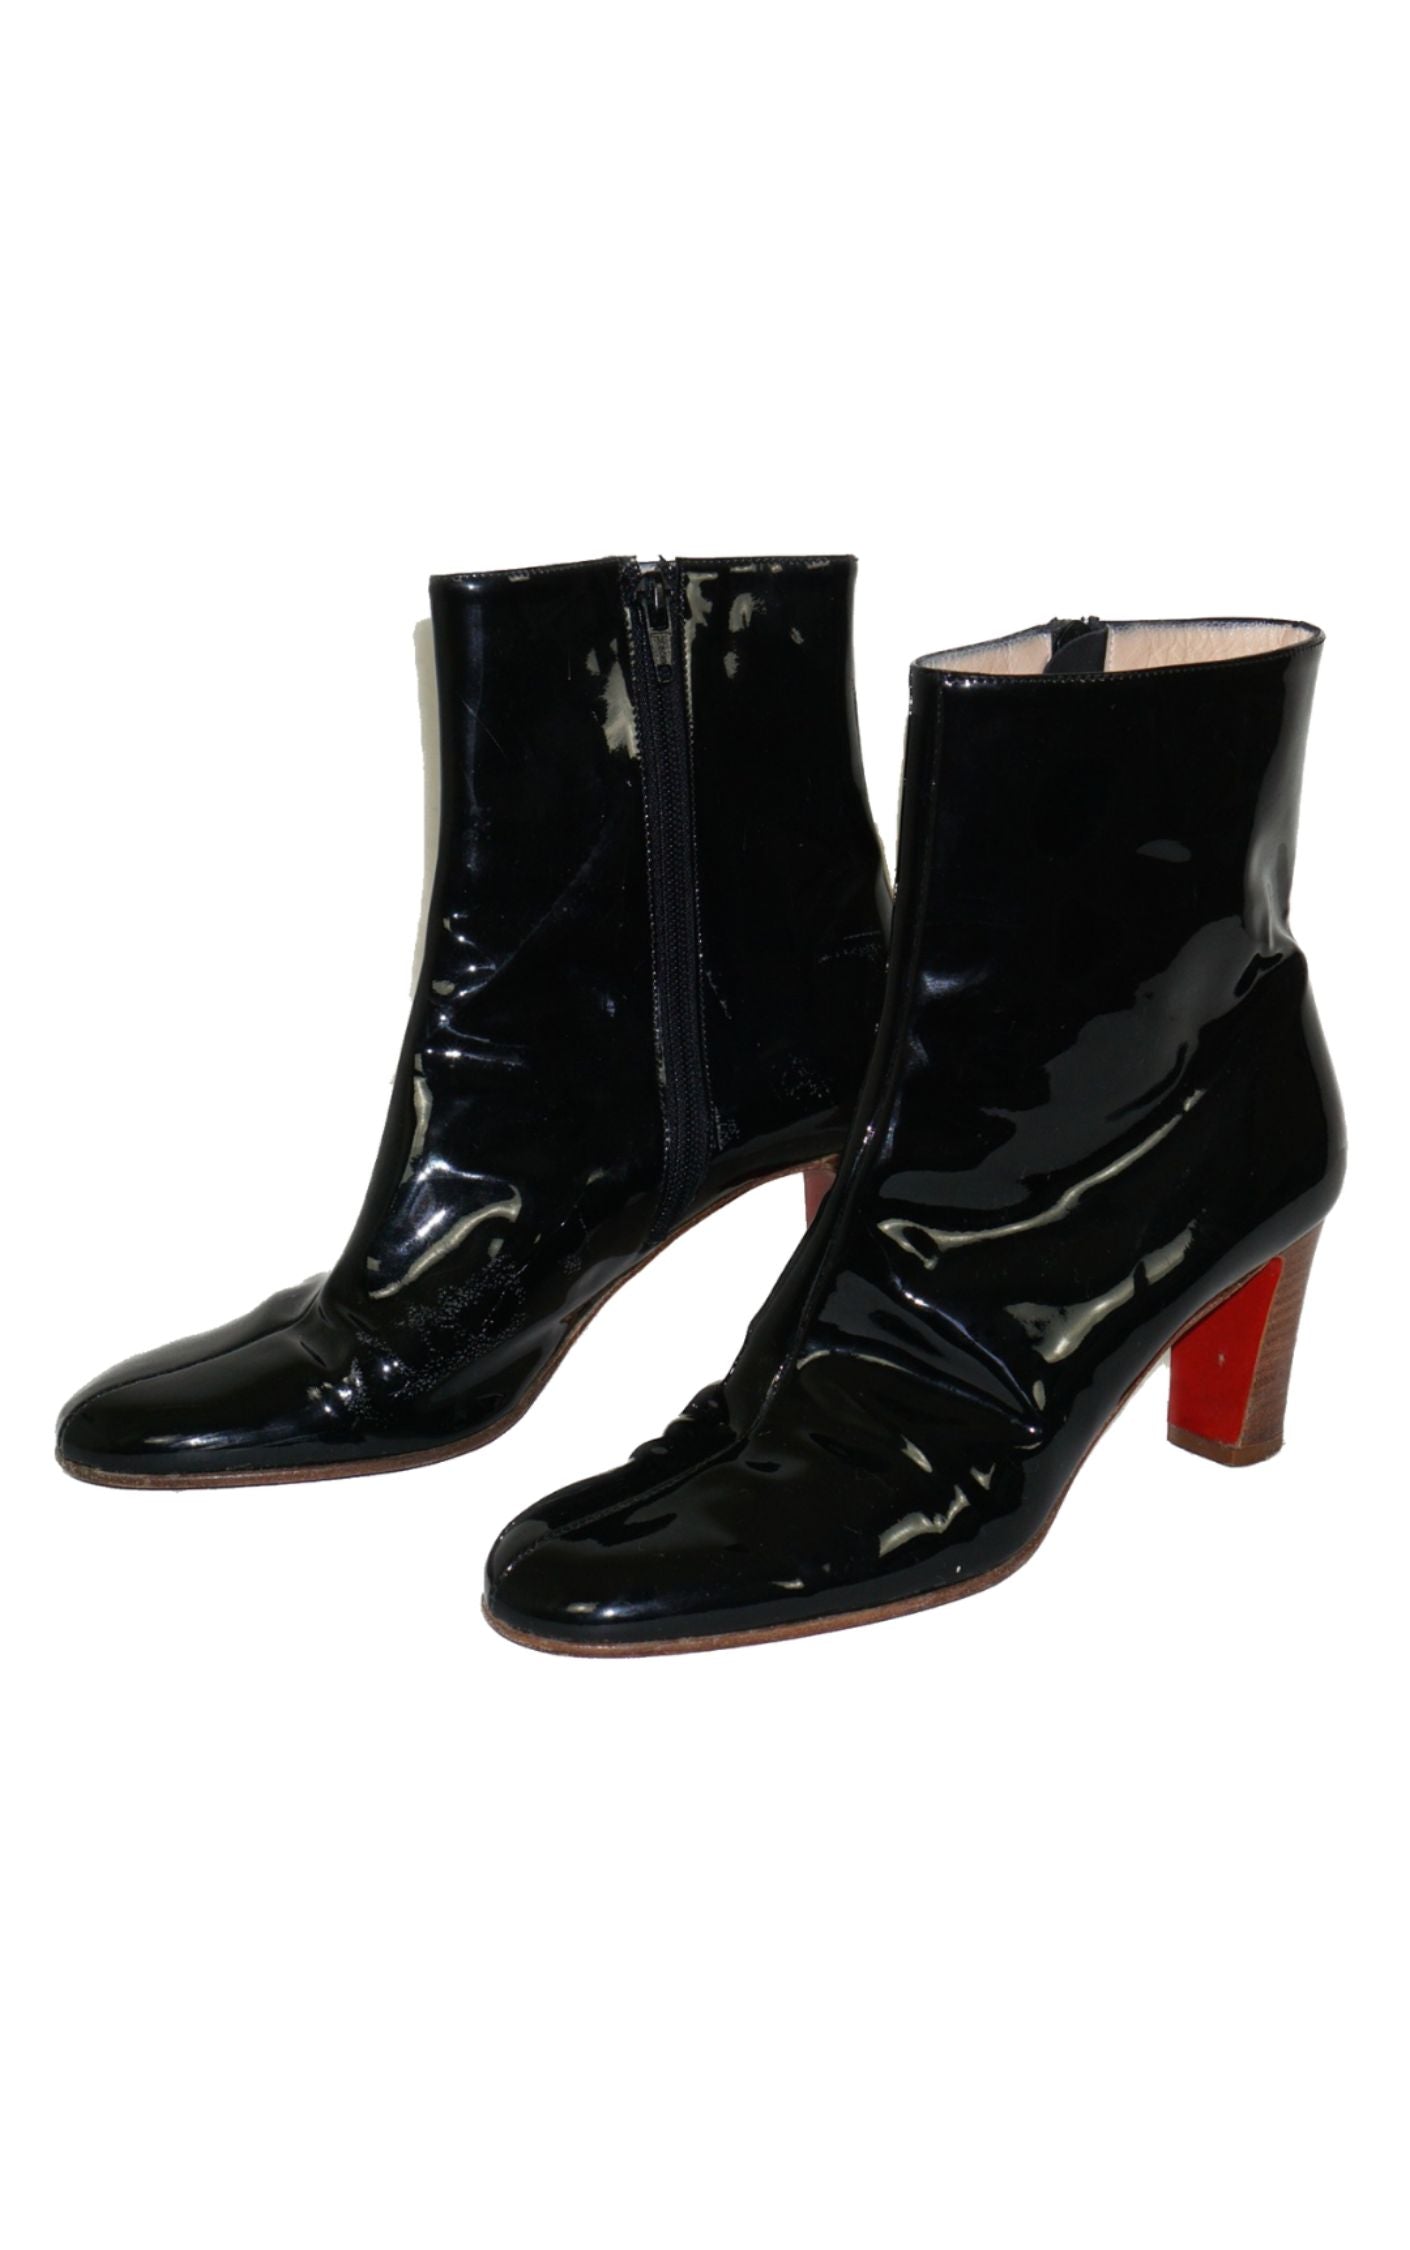 CHRISTIAN LOUBOUTIN Patent Leather Ankle Boots resellum